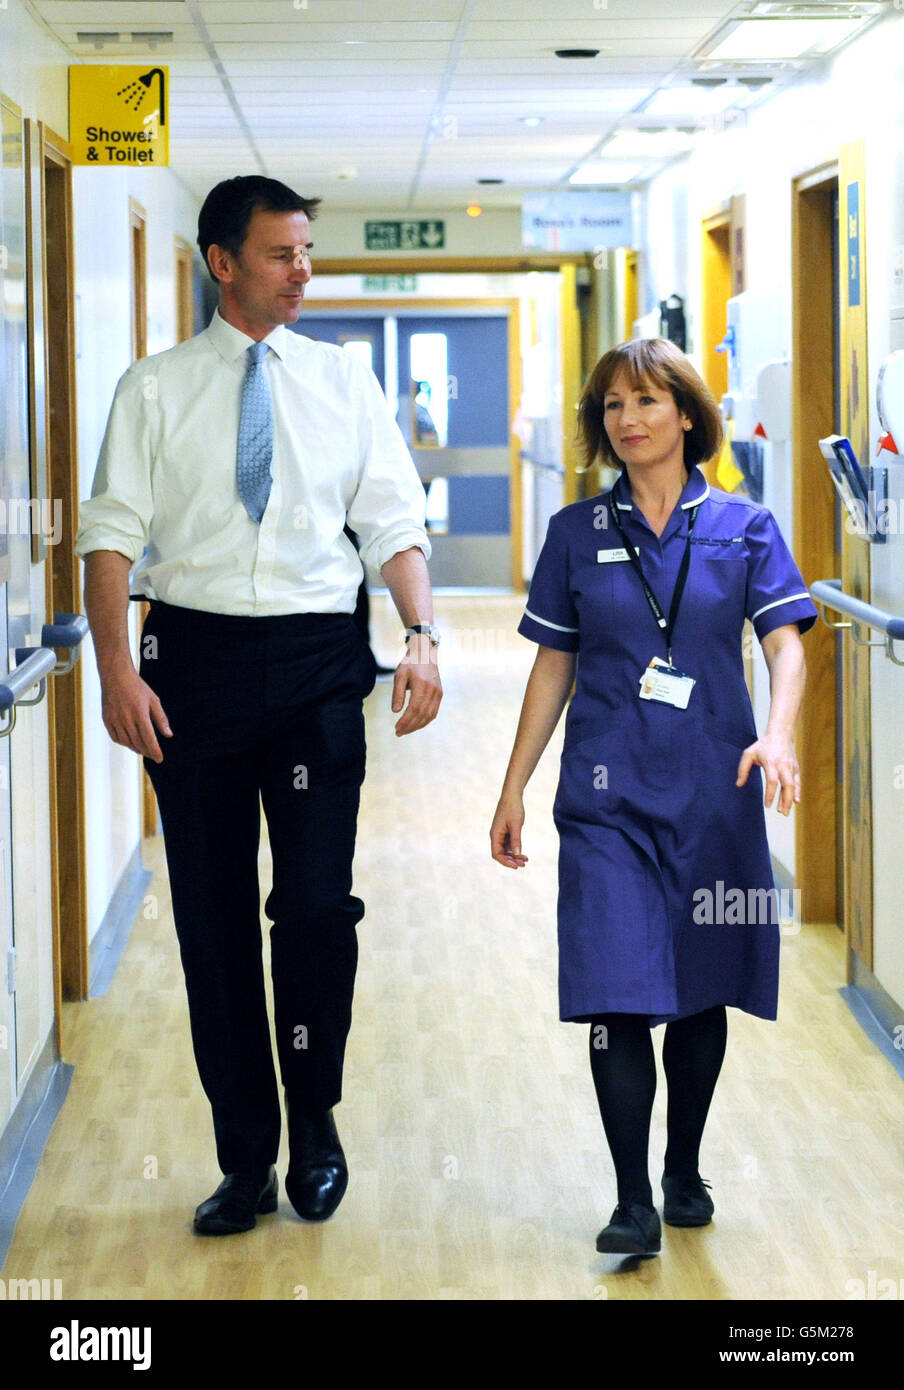 Health Secretary Jeremy Hunt meets matron Lisa de Jonge on the Marjory Warren ward at Kings College Hospital in London today. The ward is part of the Health and Ageing unit which assesses, treats and rehabilitates the elderly. Stock Photo